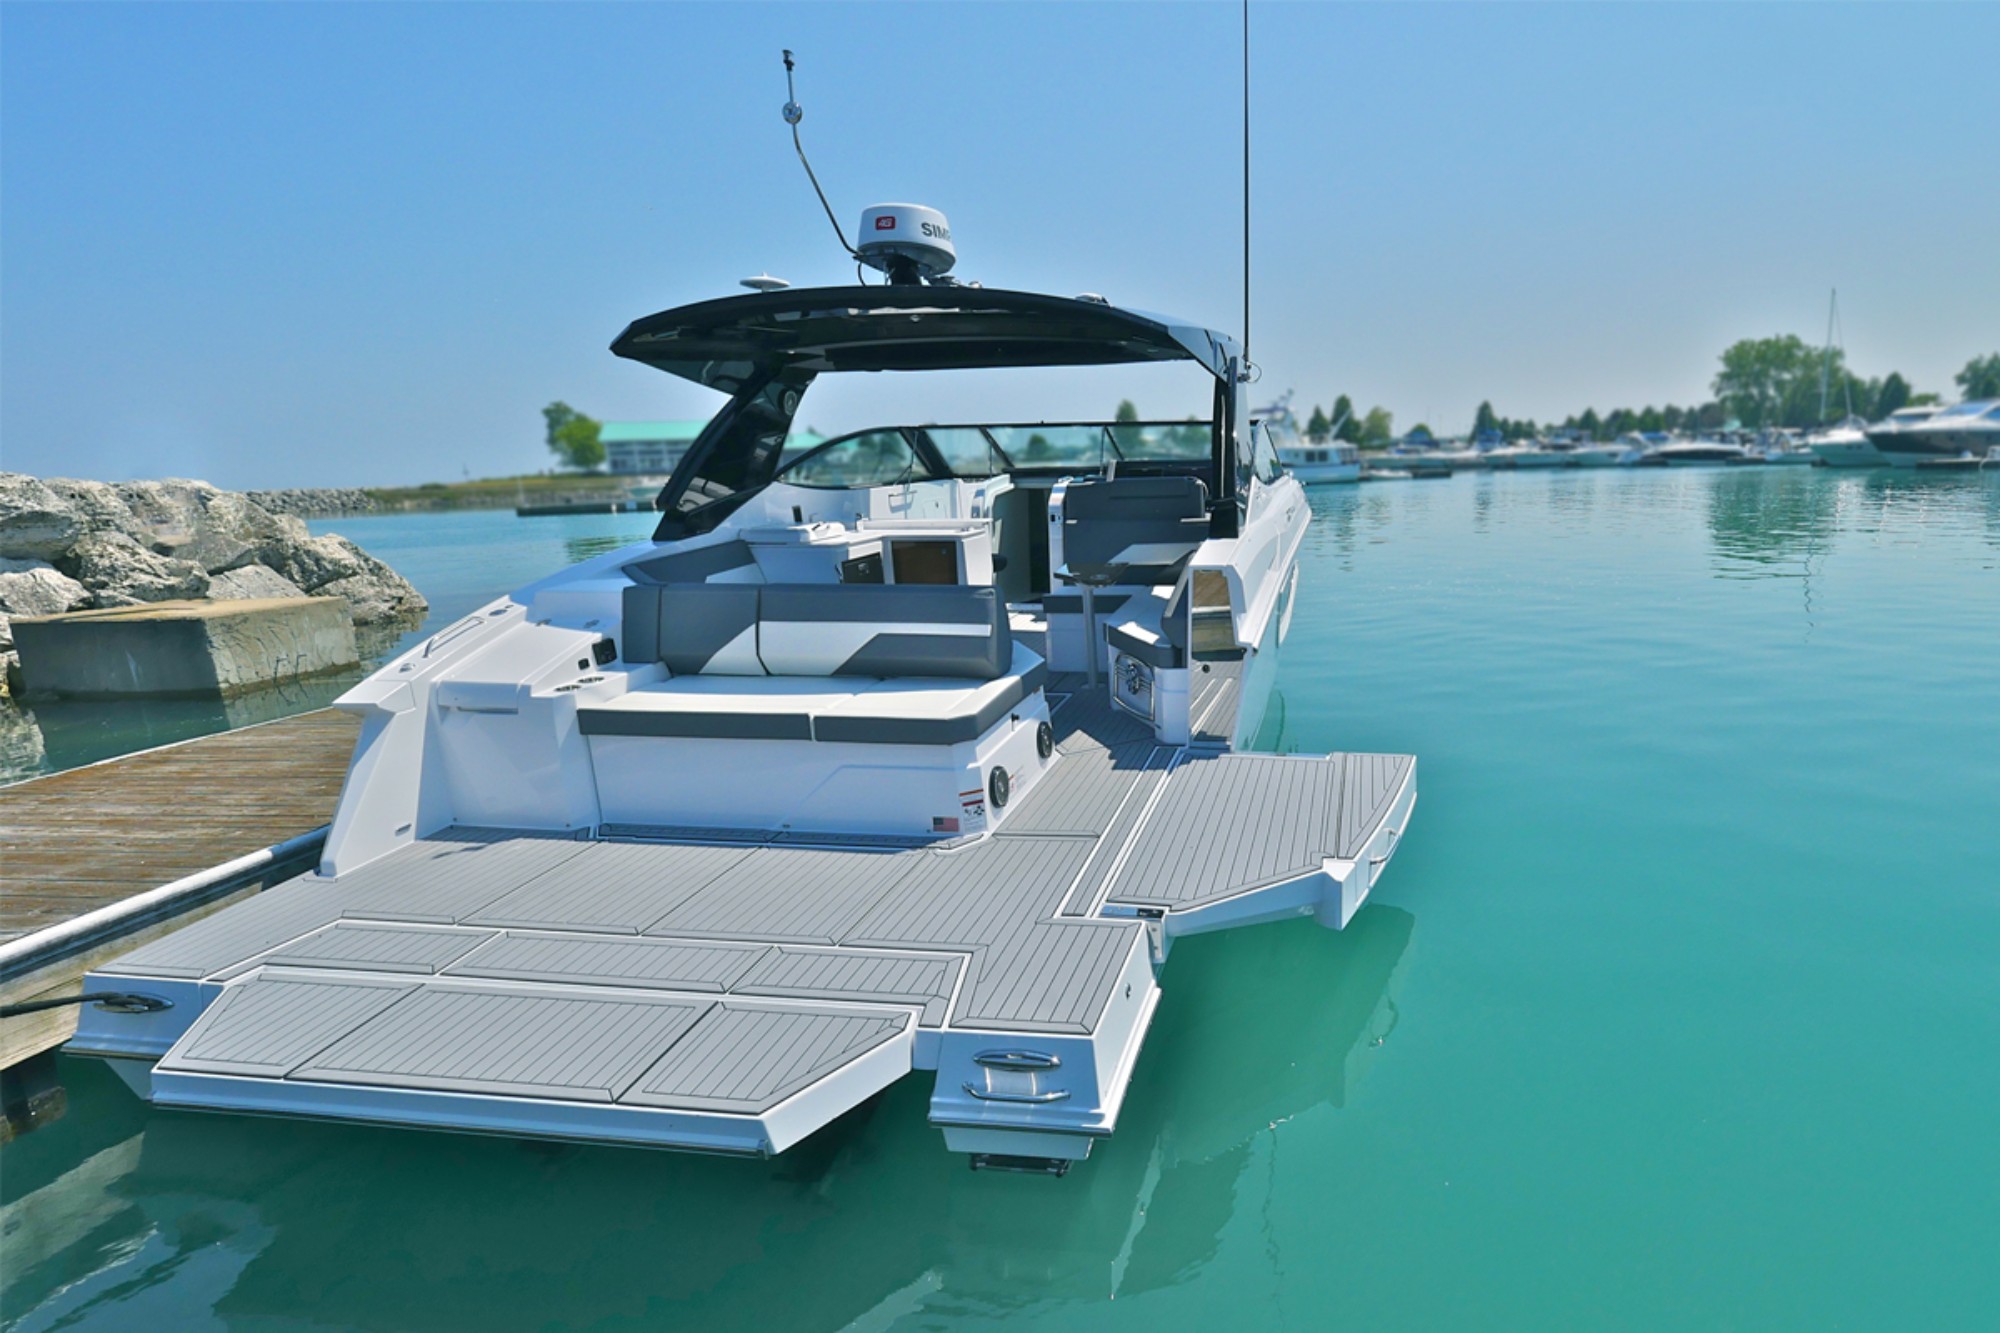 cruiser yachts for sale ontario